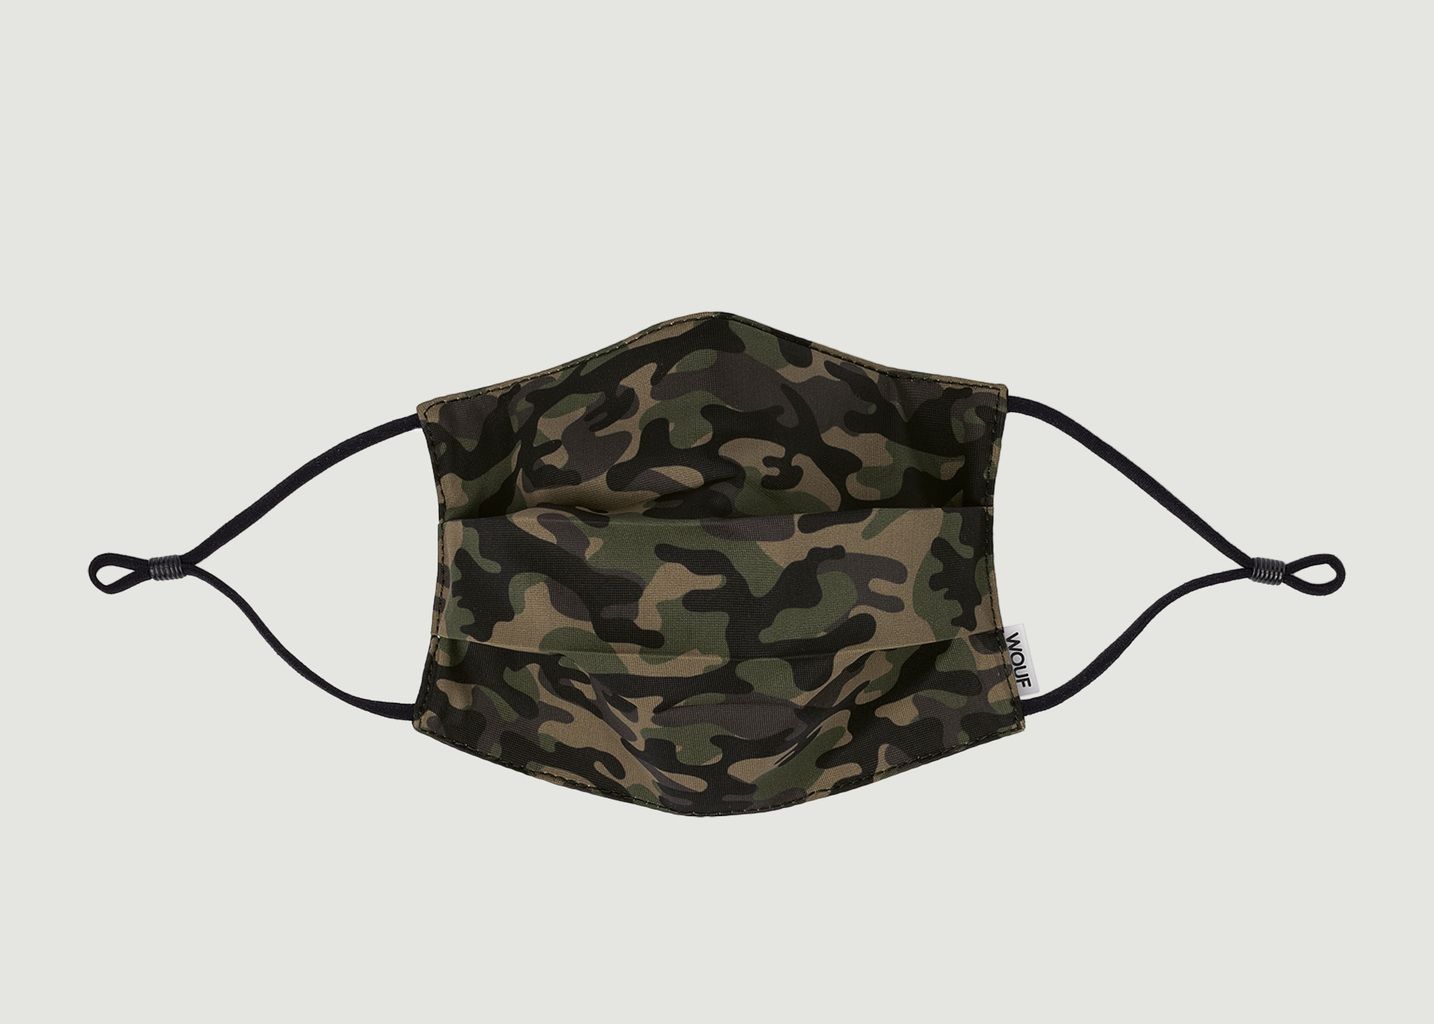 Wouf Camouflage Mask 2 Filters